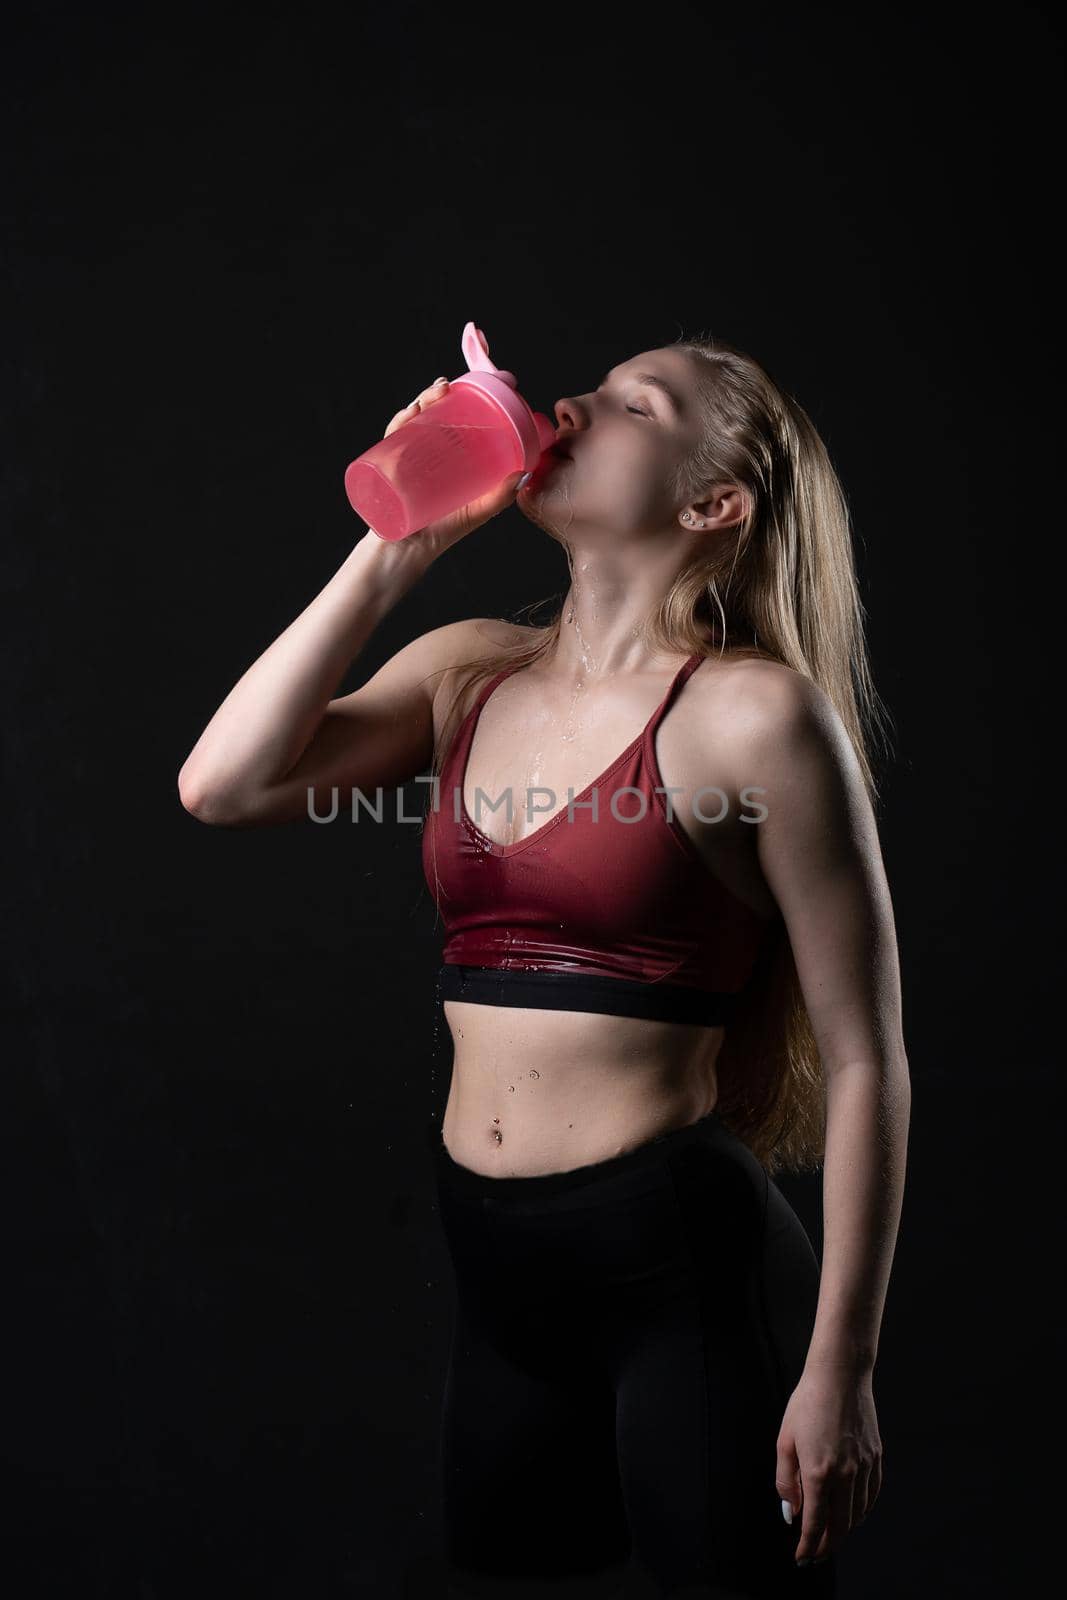 In holds shaker fitness sex hand pink a her girl in black background shaker pink black workout, from gym lifestyle for healthy for trainer isolated, sexy people. Sweat model beauty